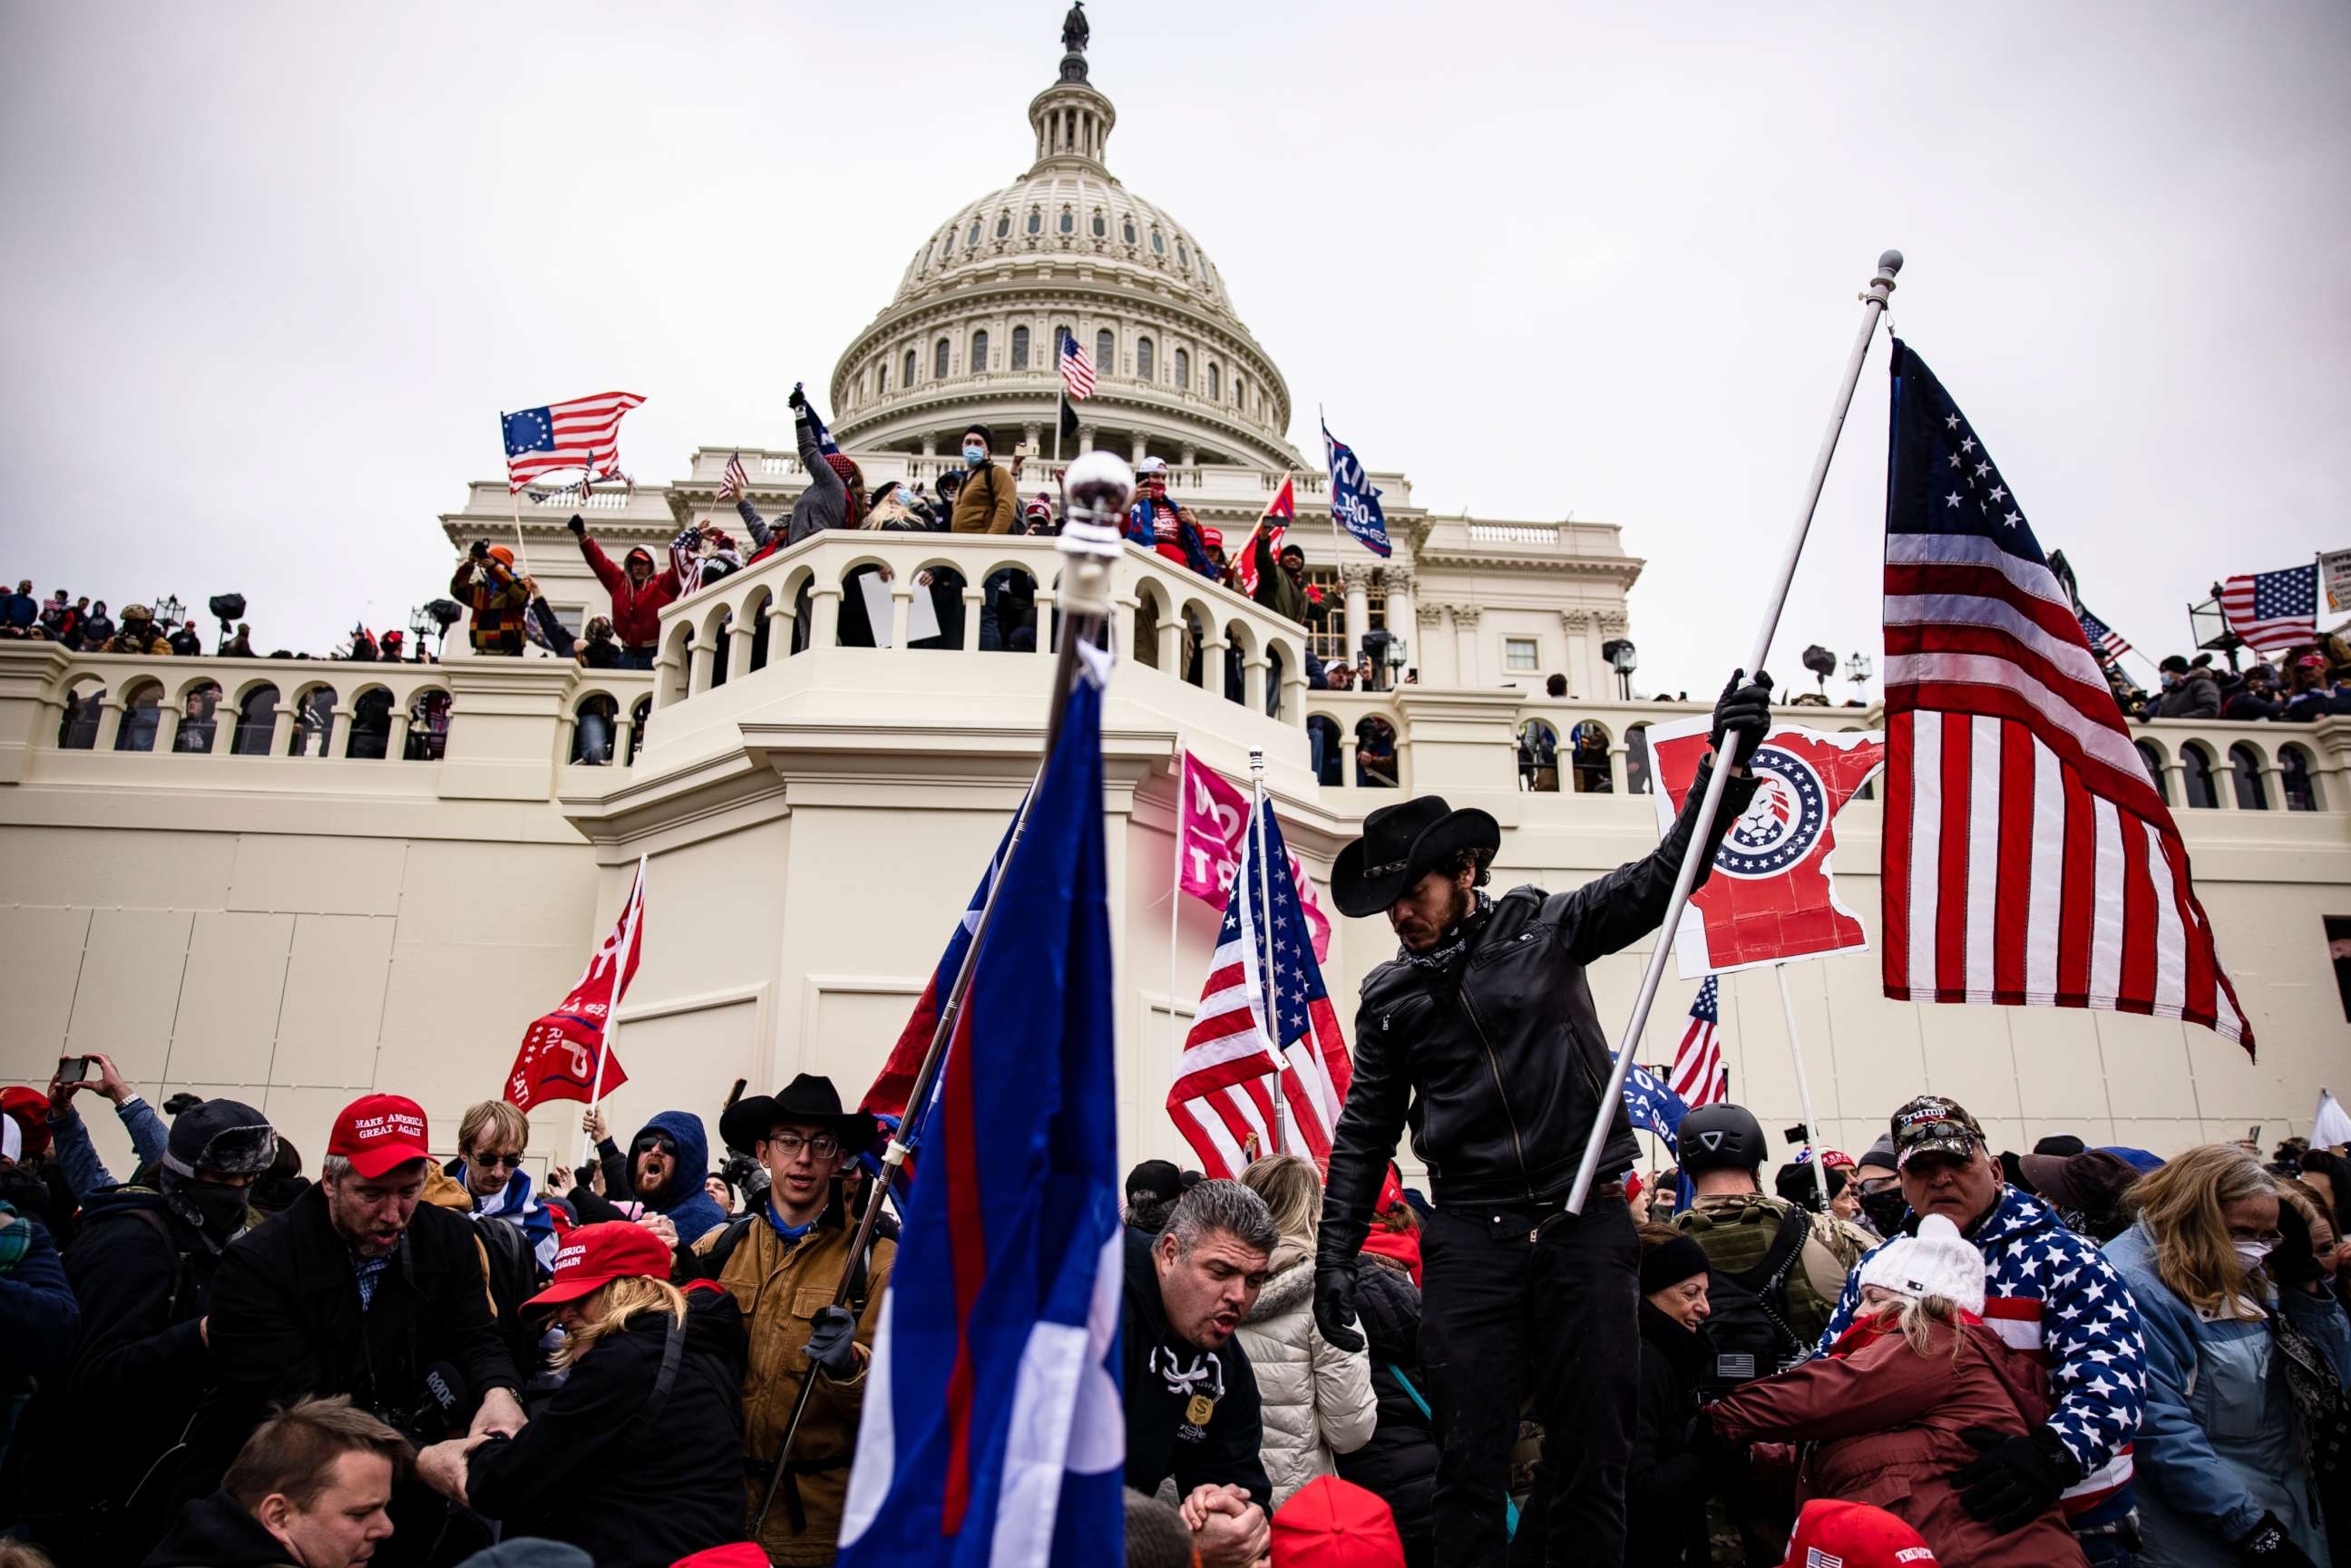 PHOTO: Trump supporters storm the U.S. Capitol following a rally with President Donald Trump on Jan. 6, 2021, in Washington, D.C.